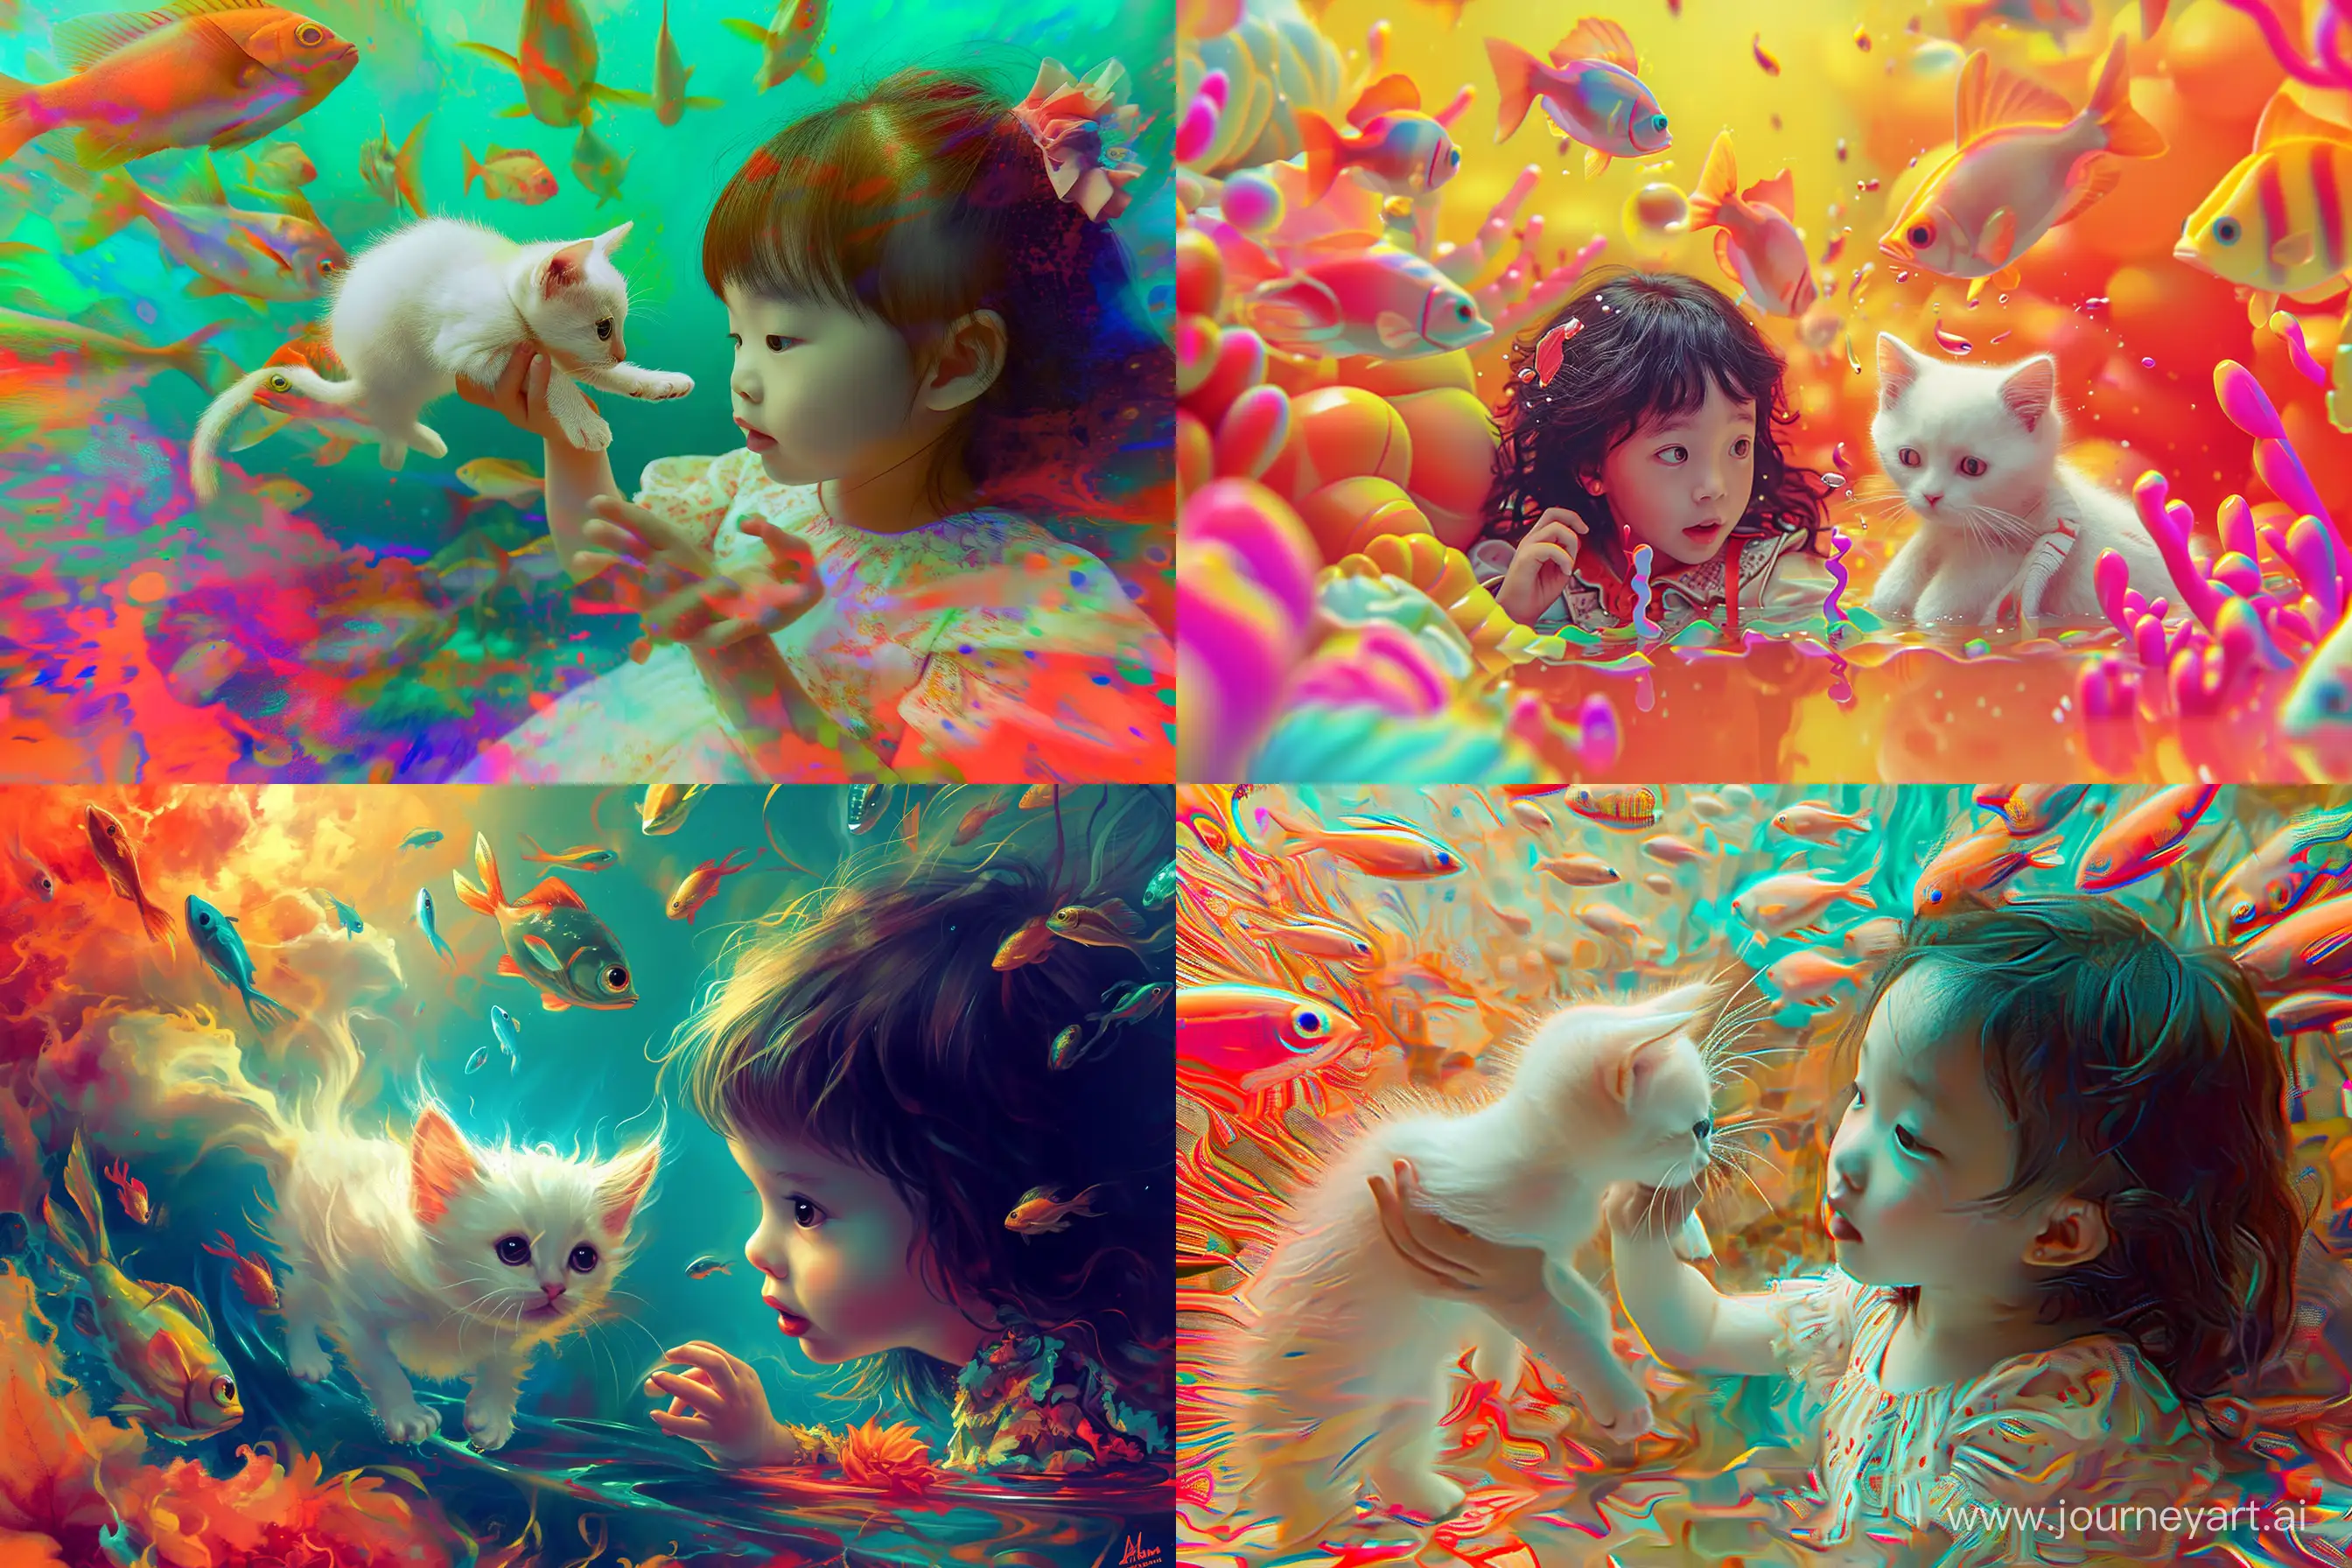 A little girl with a littl white cat wit fishes in the air, in a vibrant and bizarre world, reminiscent of pop surrealism art. --ar 3:2